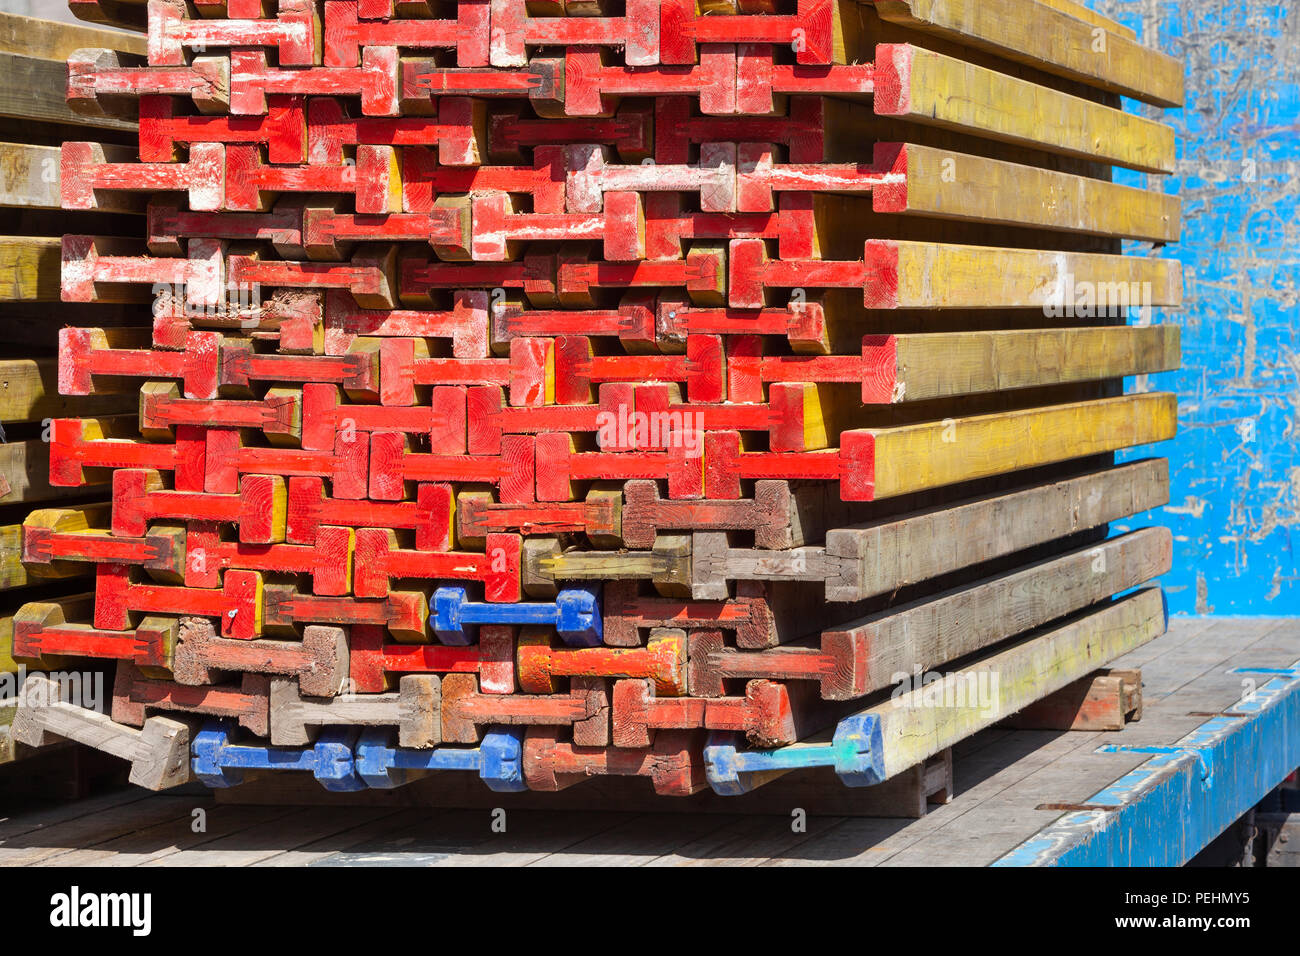 Colorful wooden beams for building market stalls stacked on a truck in the Netherlands Stock Photo